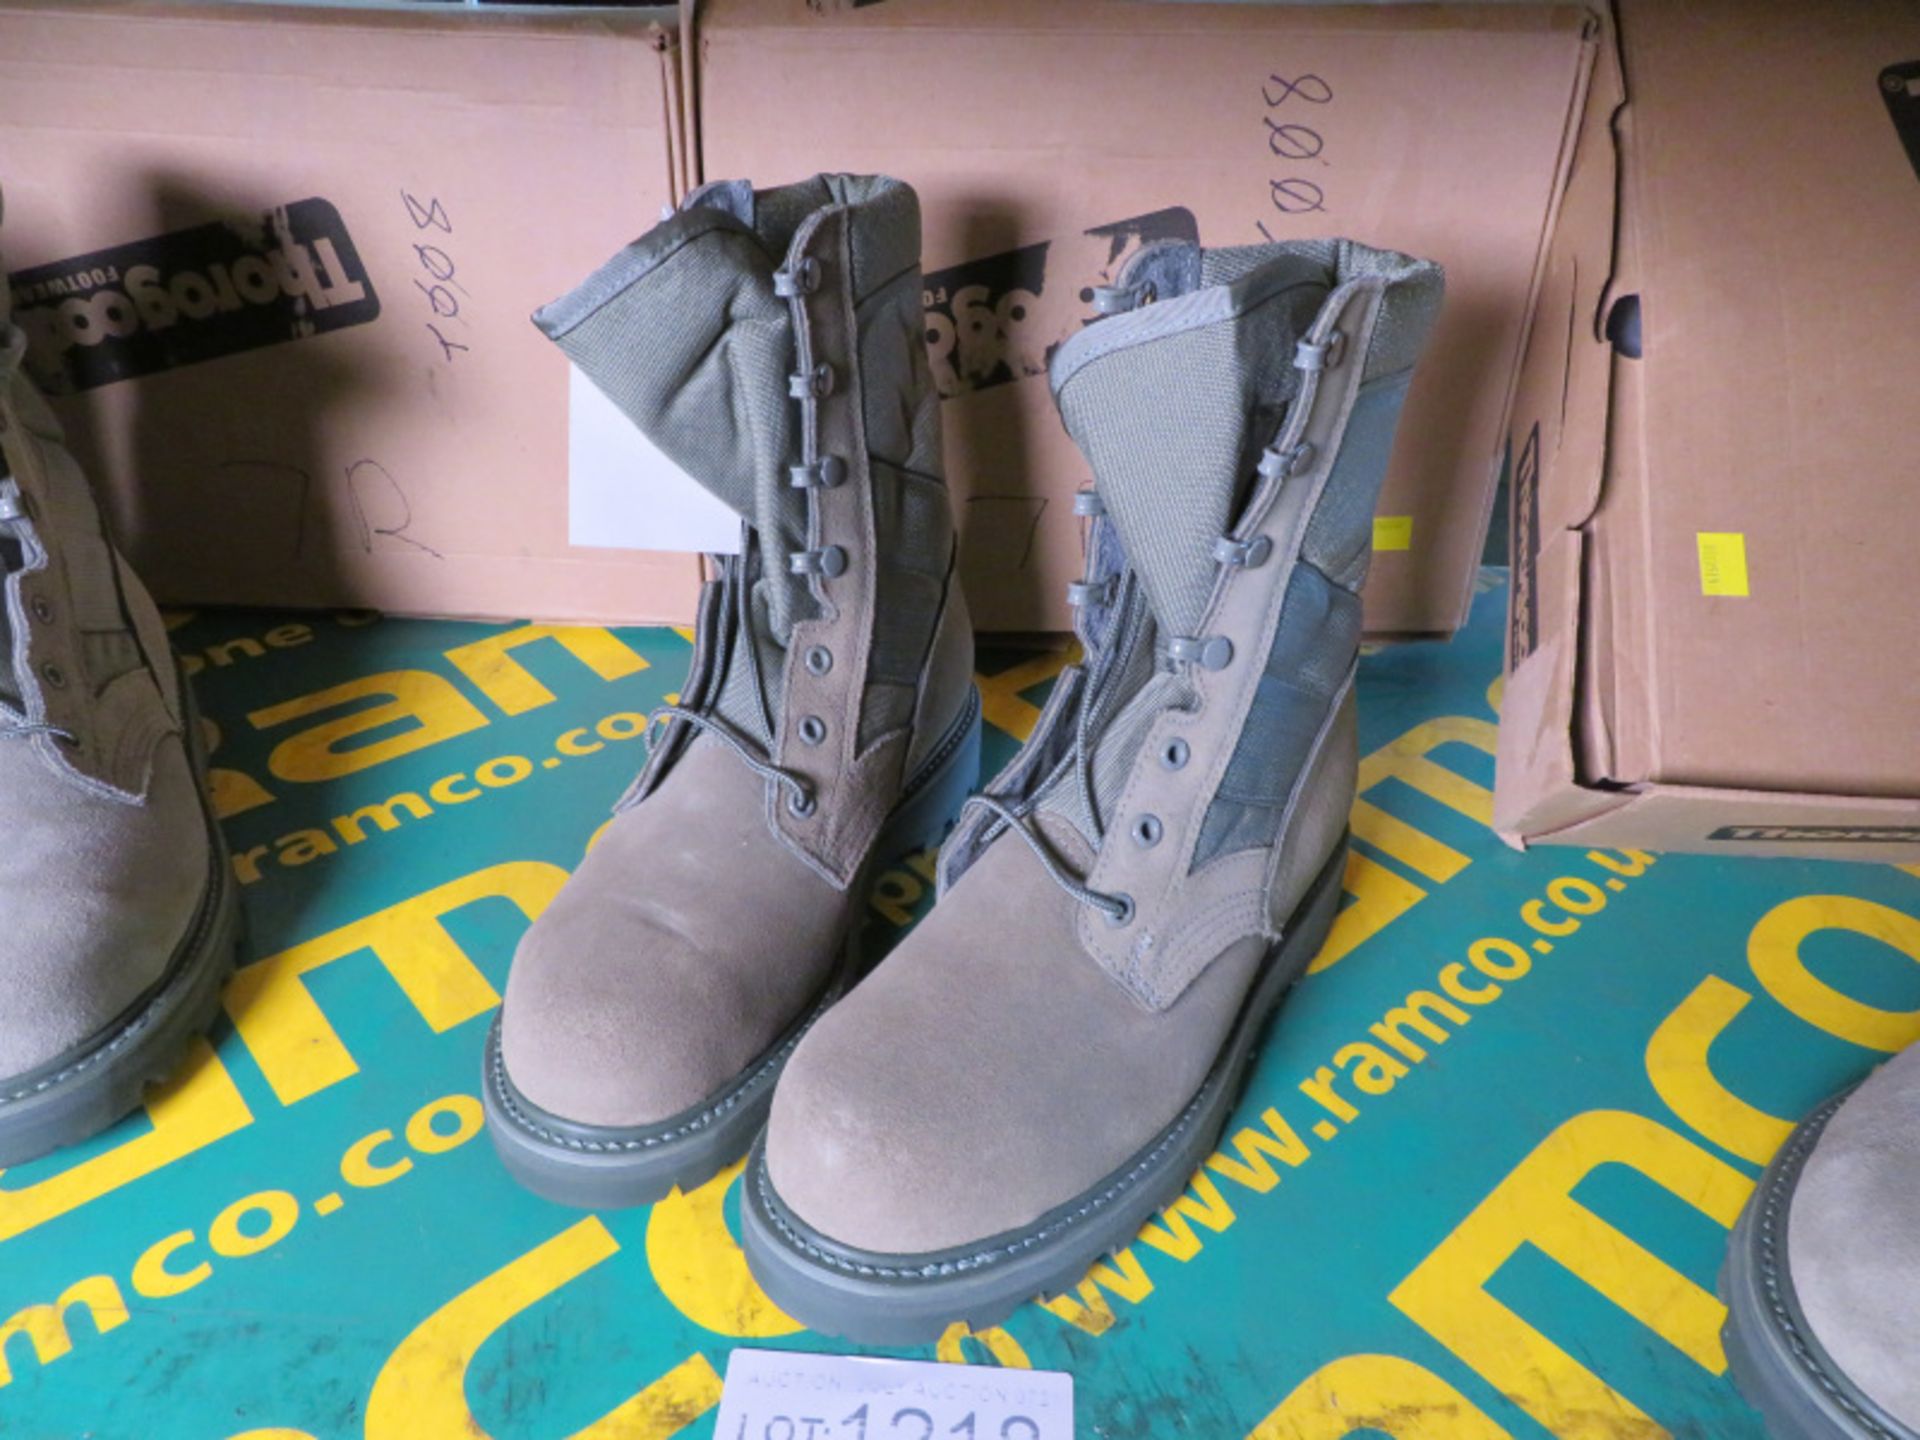 3x Pairs of Sage Hot Weather Boots (7 R x3) - Image 4 of 7